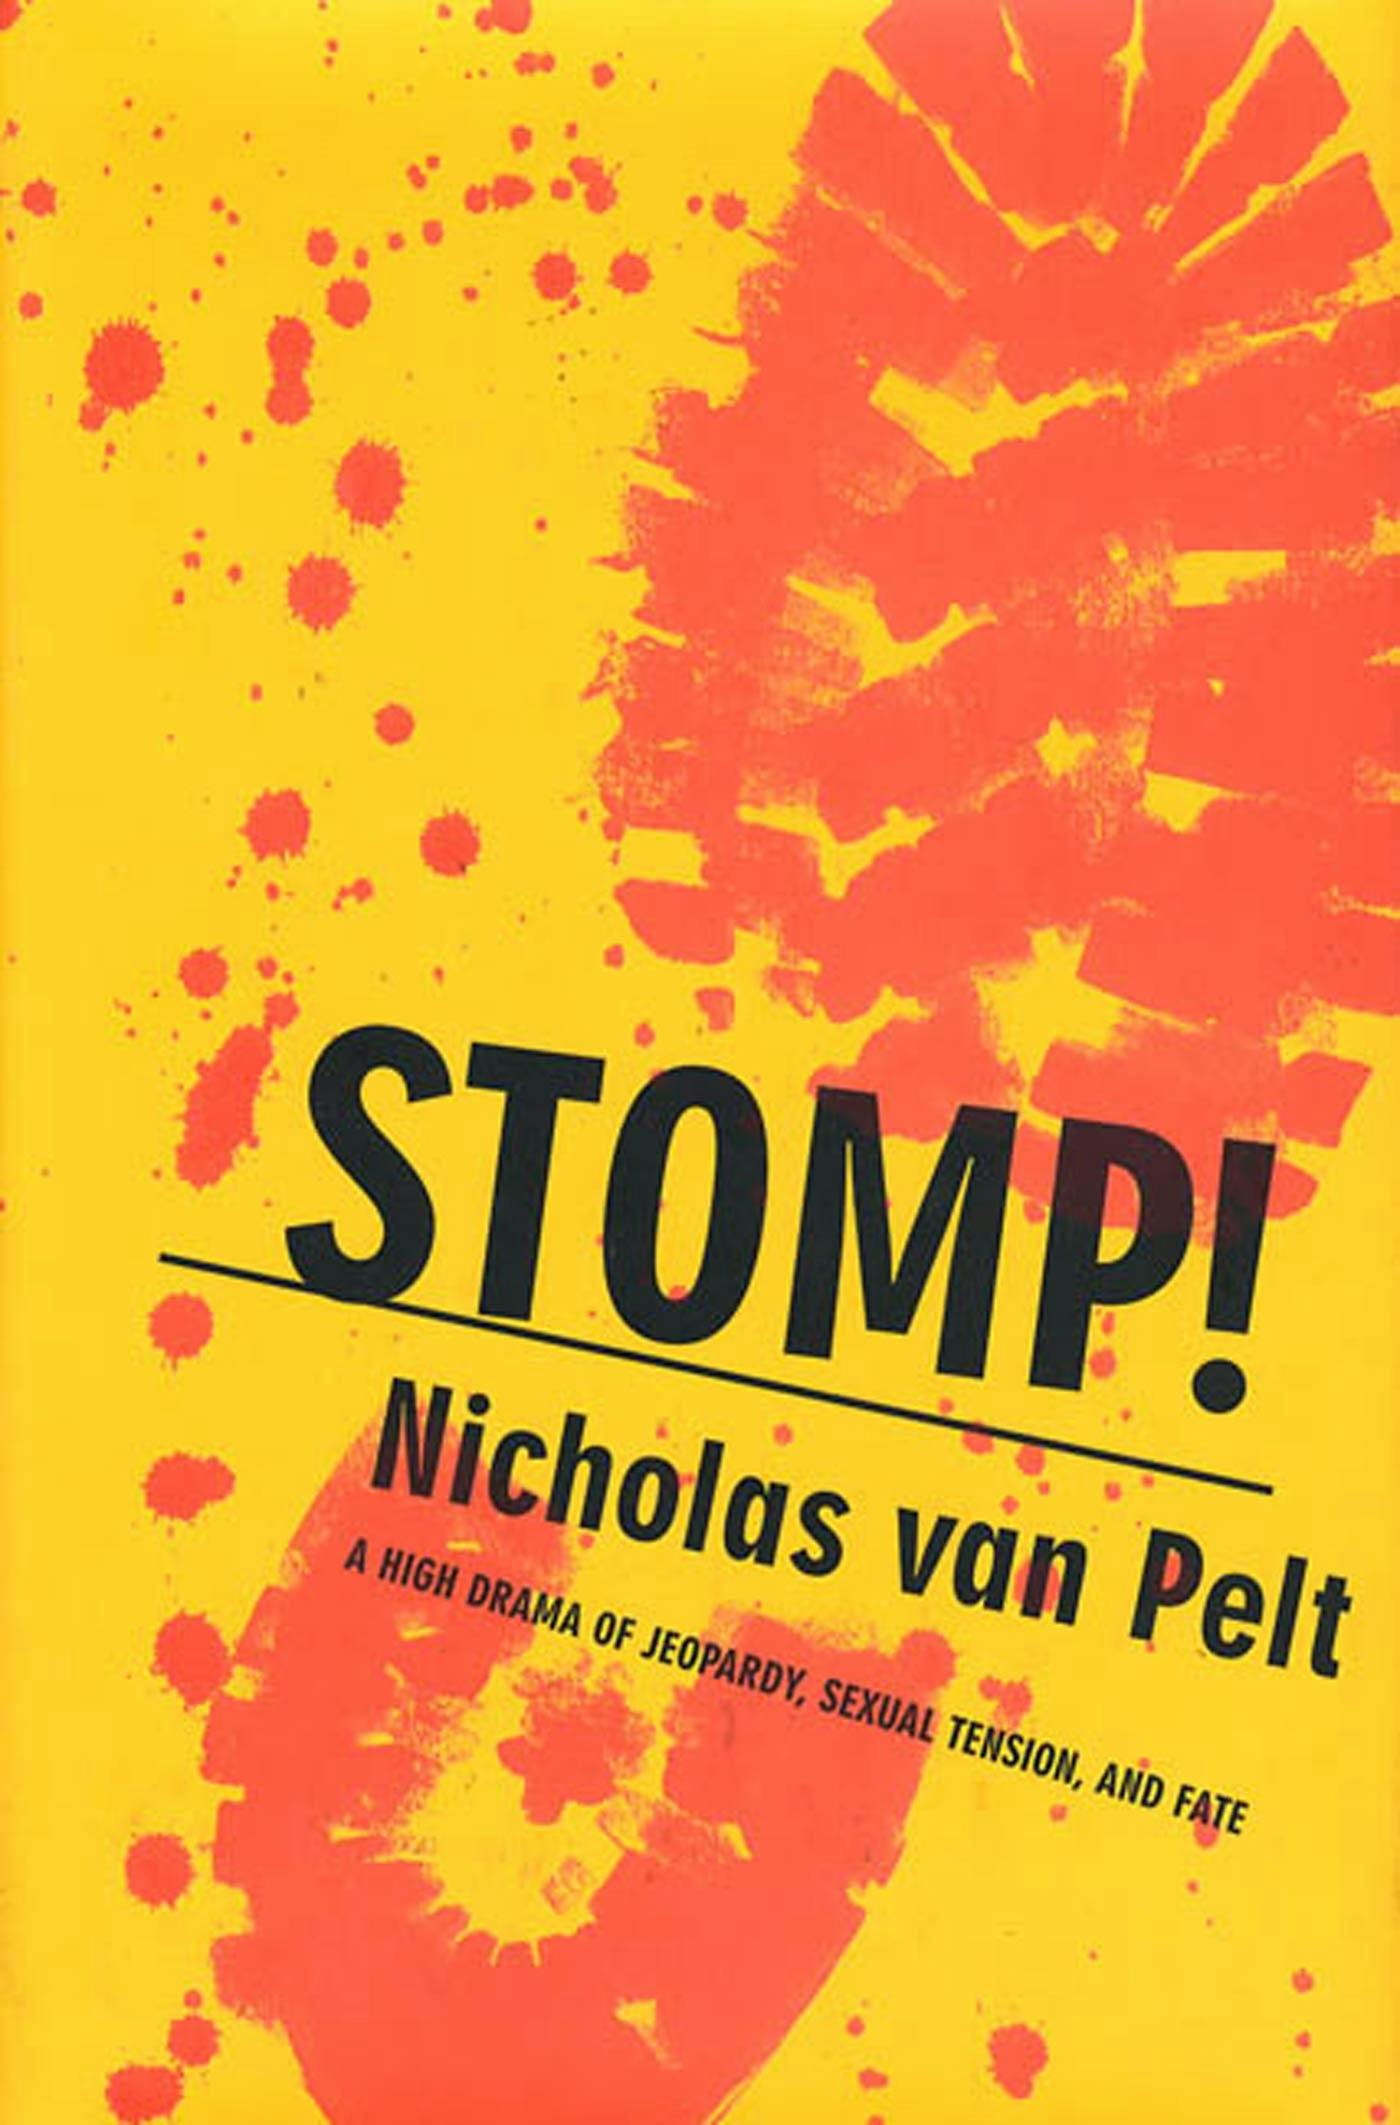 Cover for the book titled as: Stomp